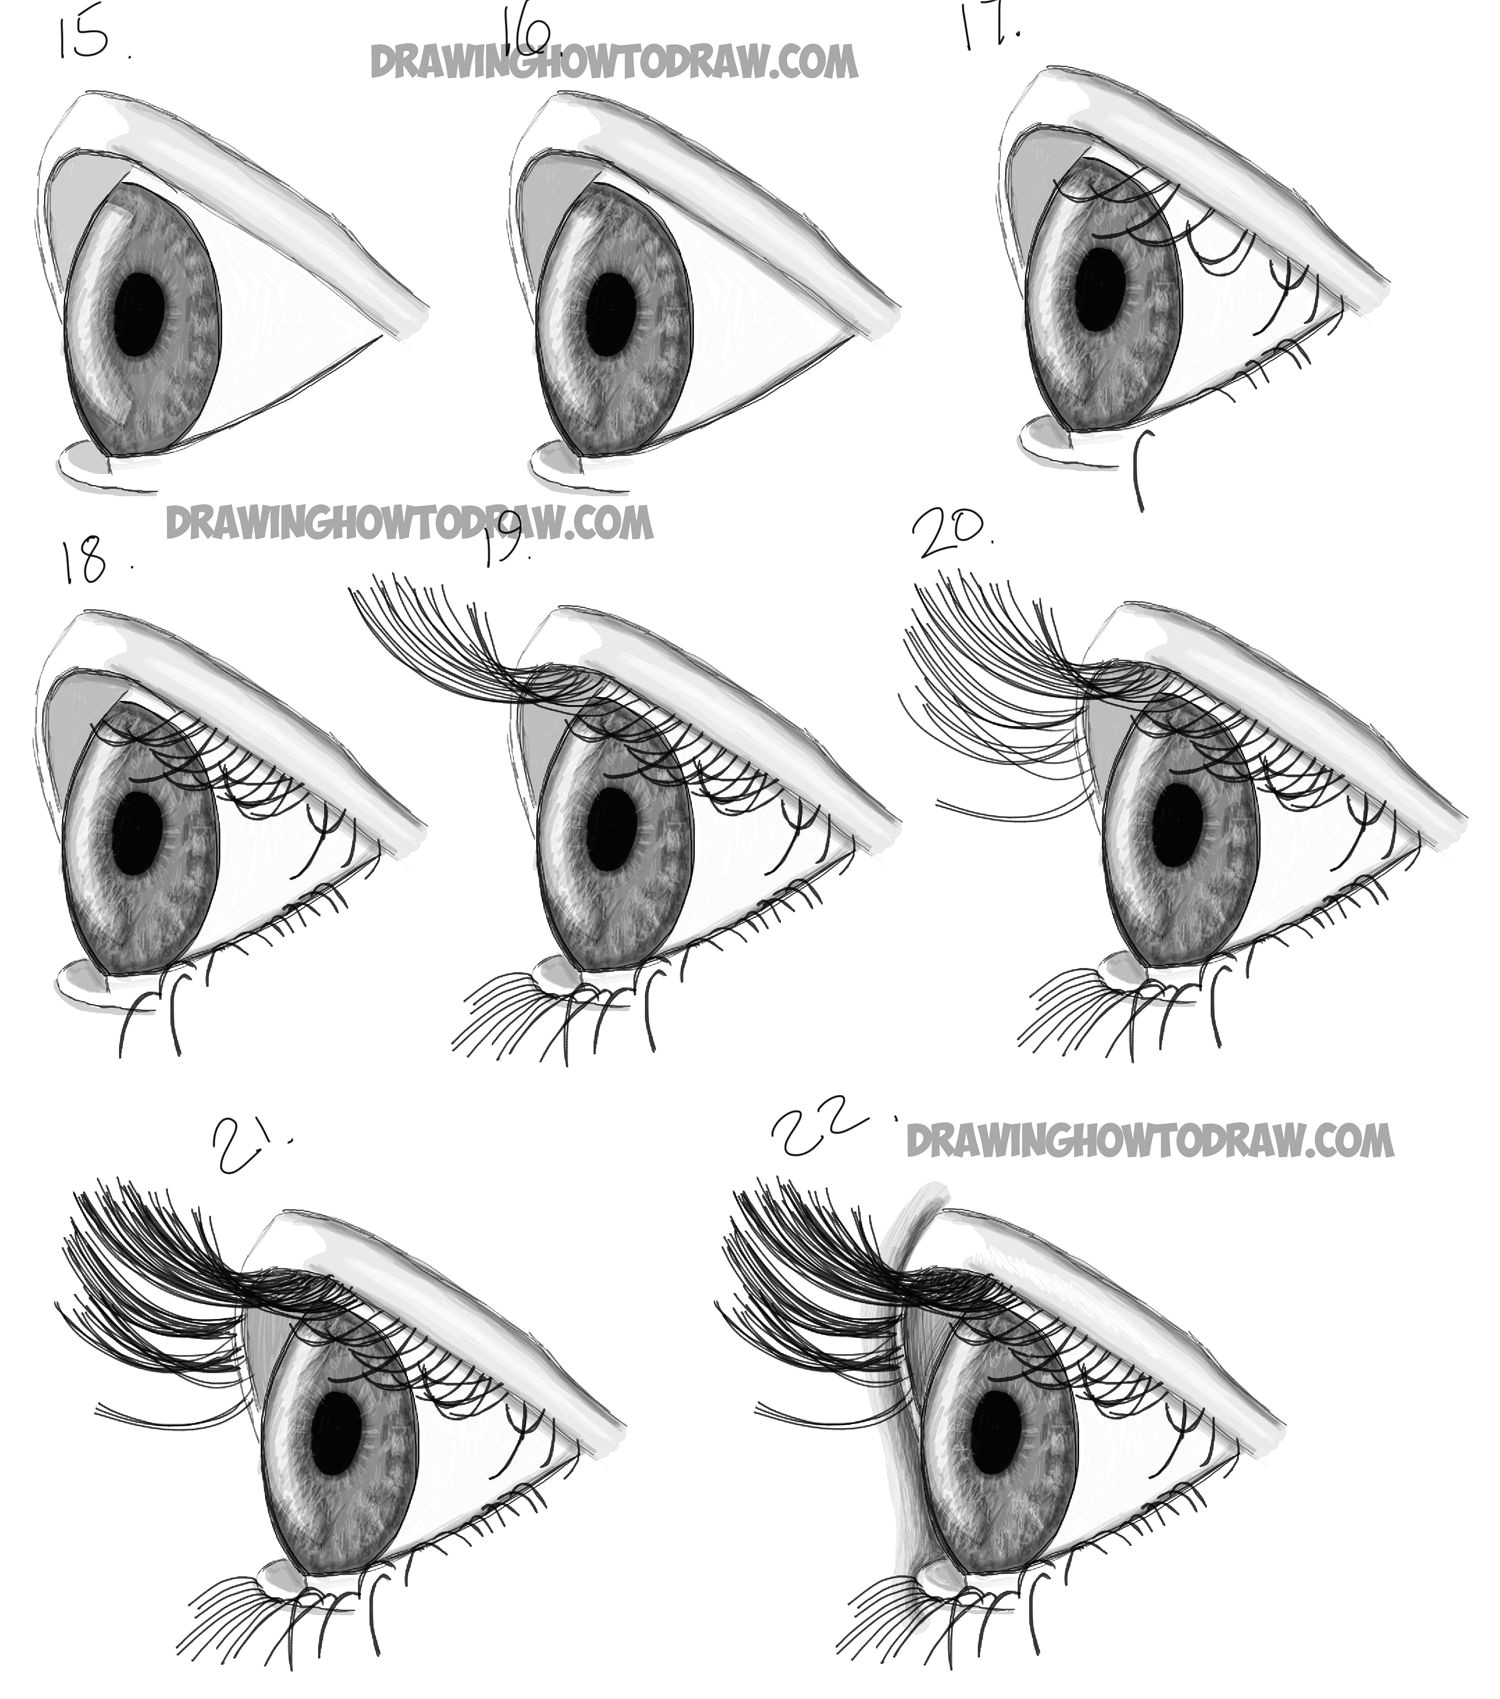 Drawing Eyes Side View How to Draw Realistic Eyes From the Side Profile View Step by Step